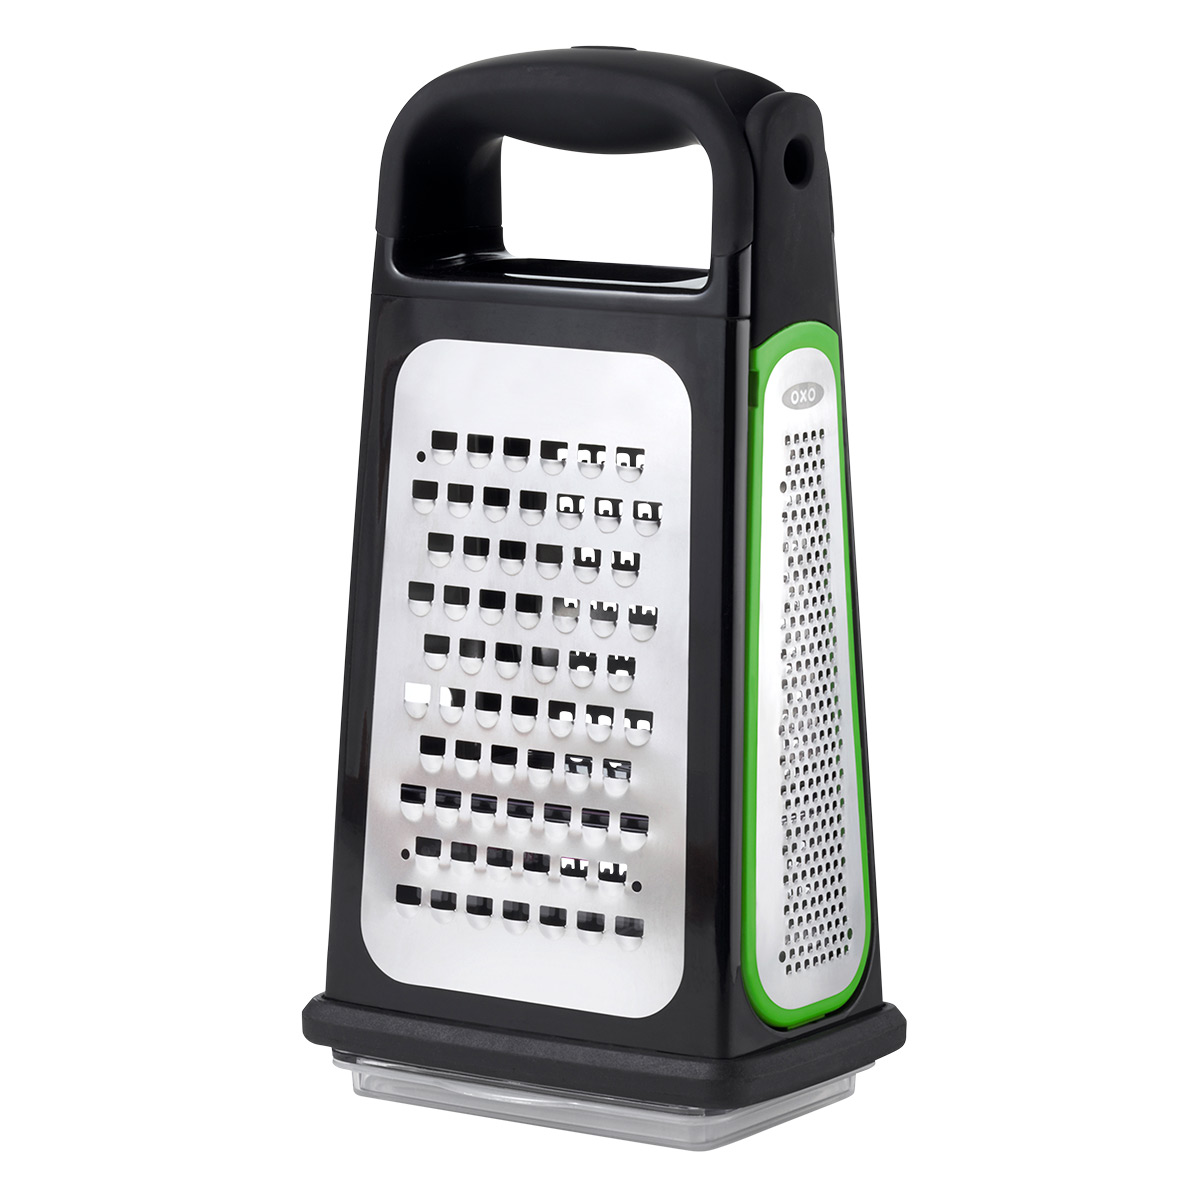 https://www.containerstore.com/catalogimages/427812/10086166-OXO-Box-Grater-VEN1.jpg